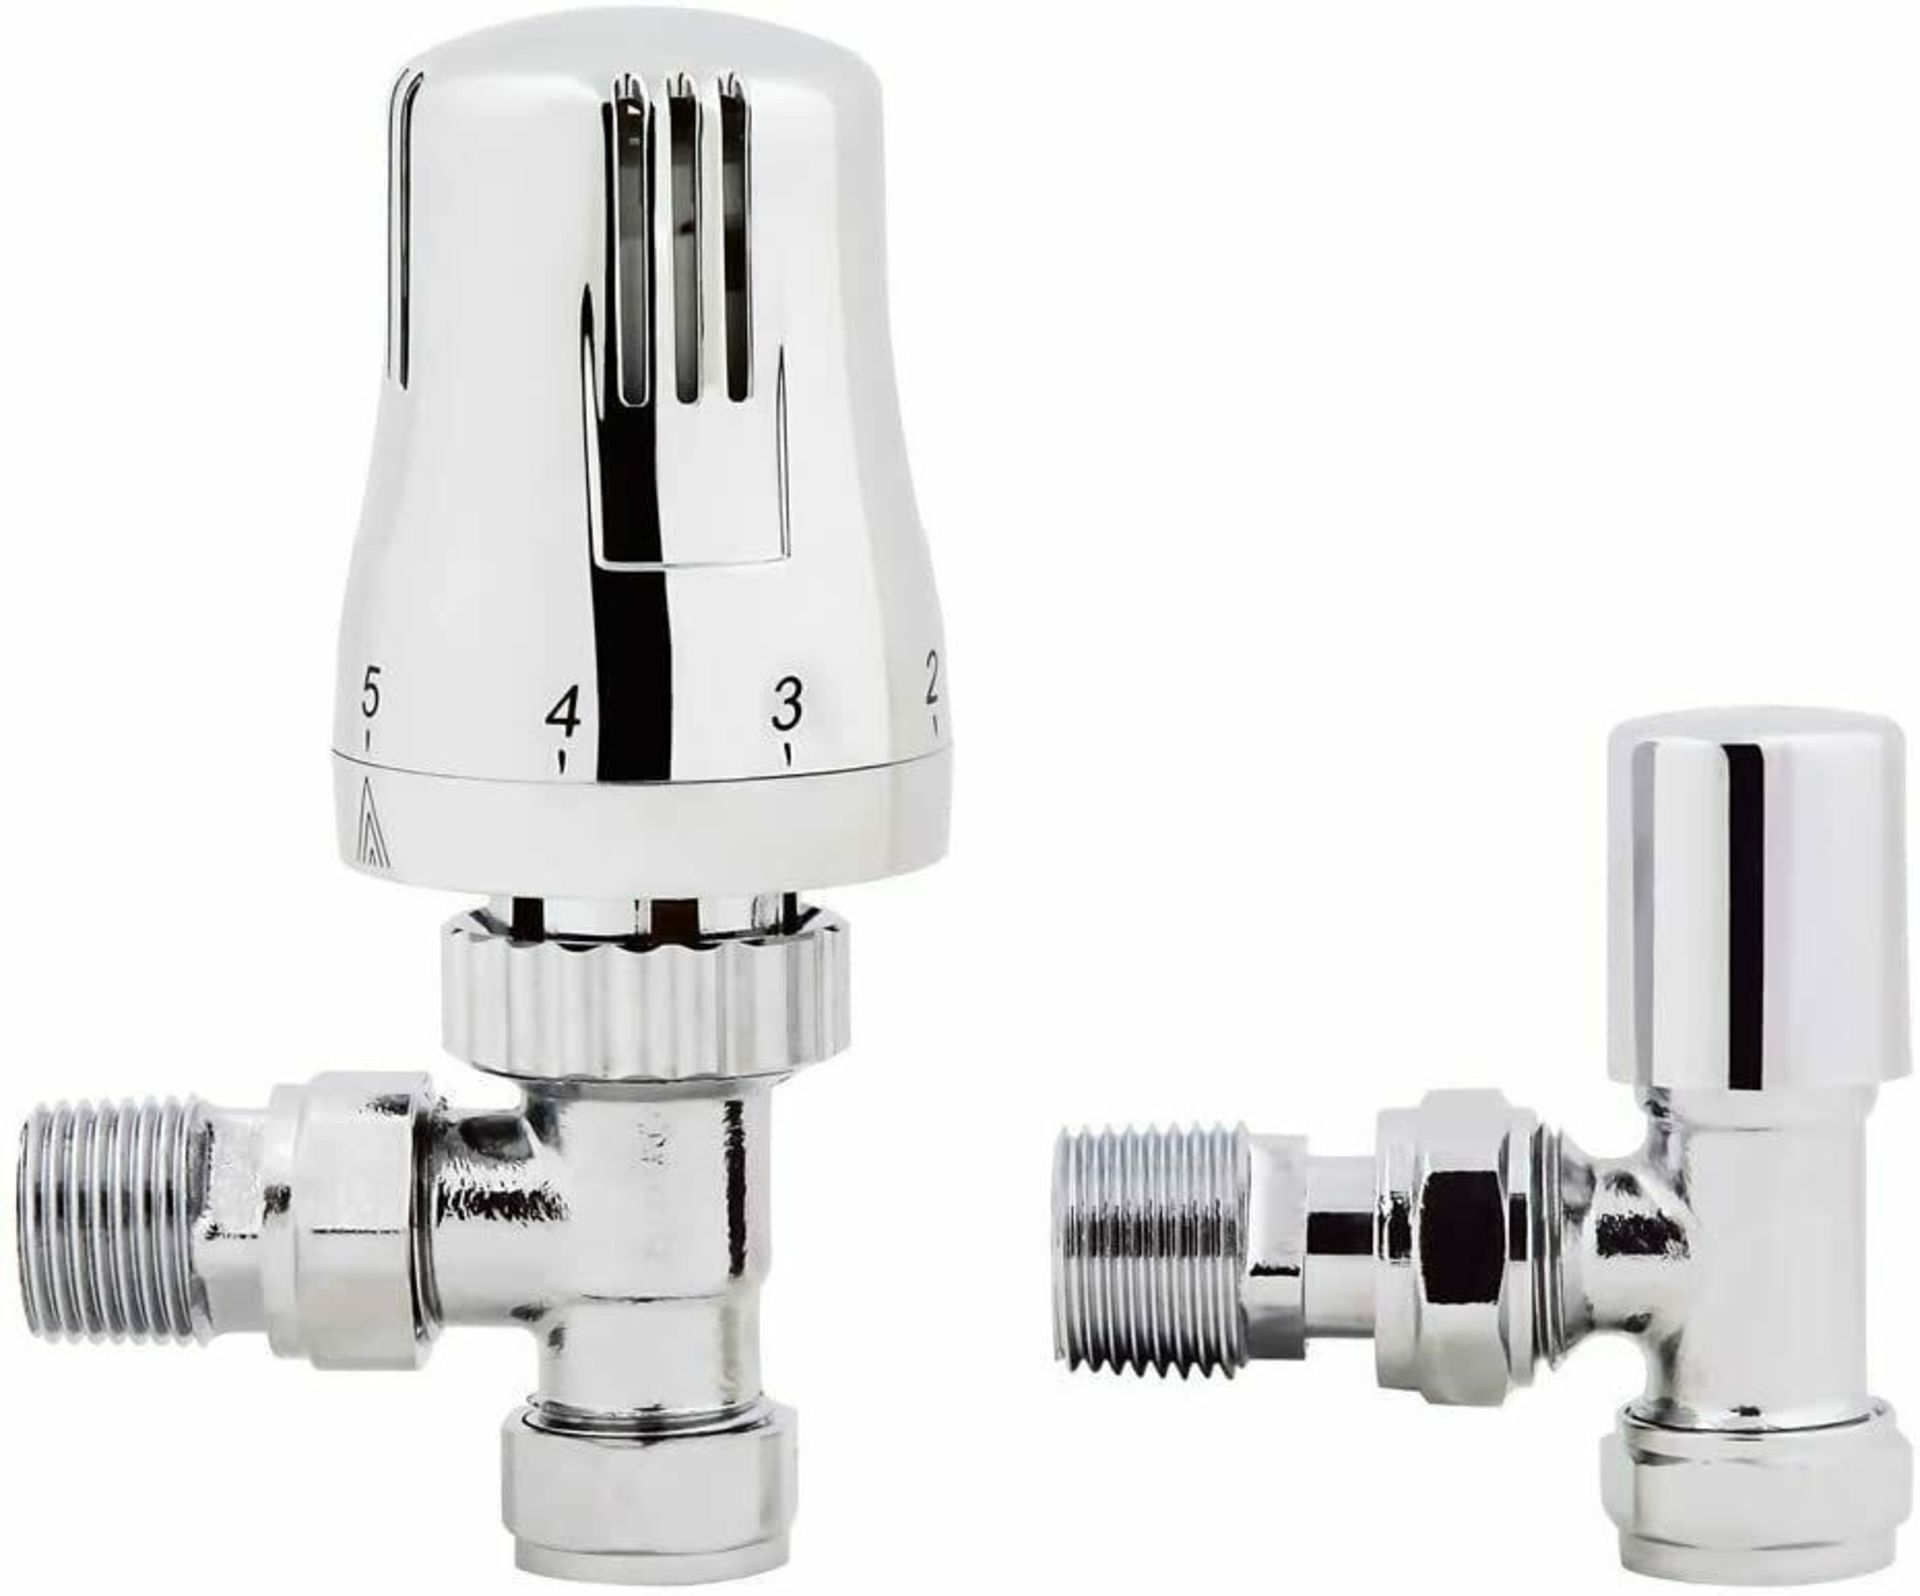 NEW & BOXED Chrome Thermostatic Control Angled Designer Radiator Valves Pair 15mm _" NEW. RRP £49.99